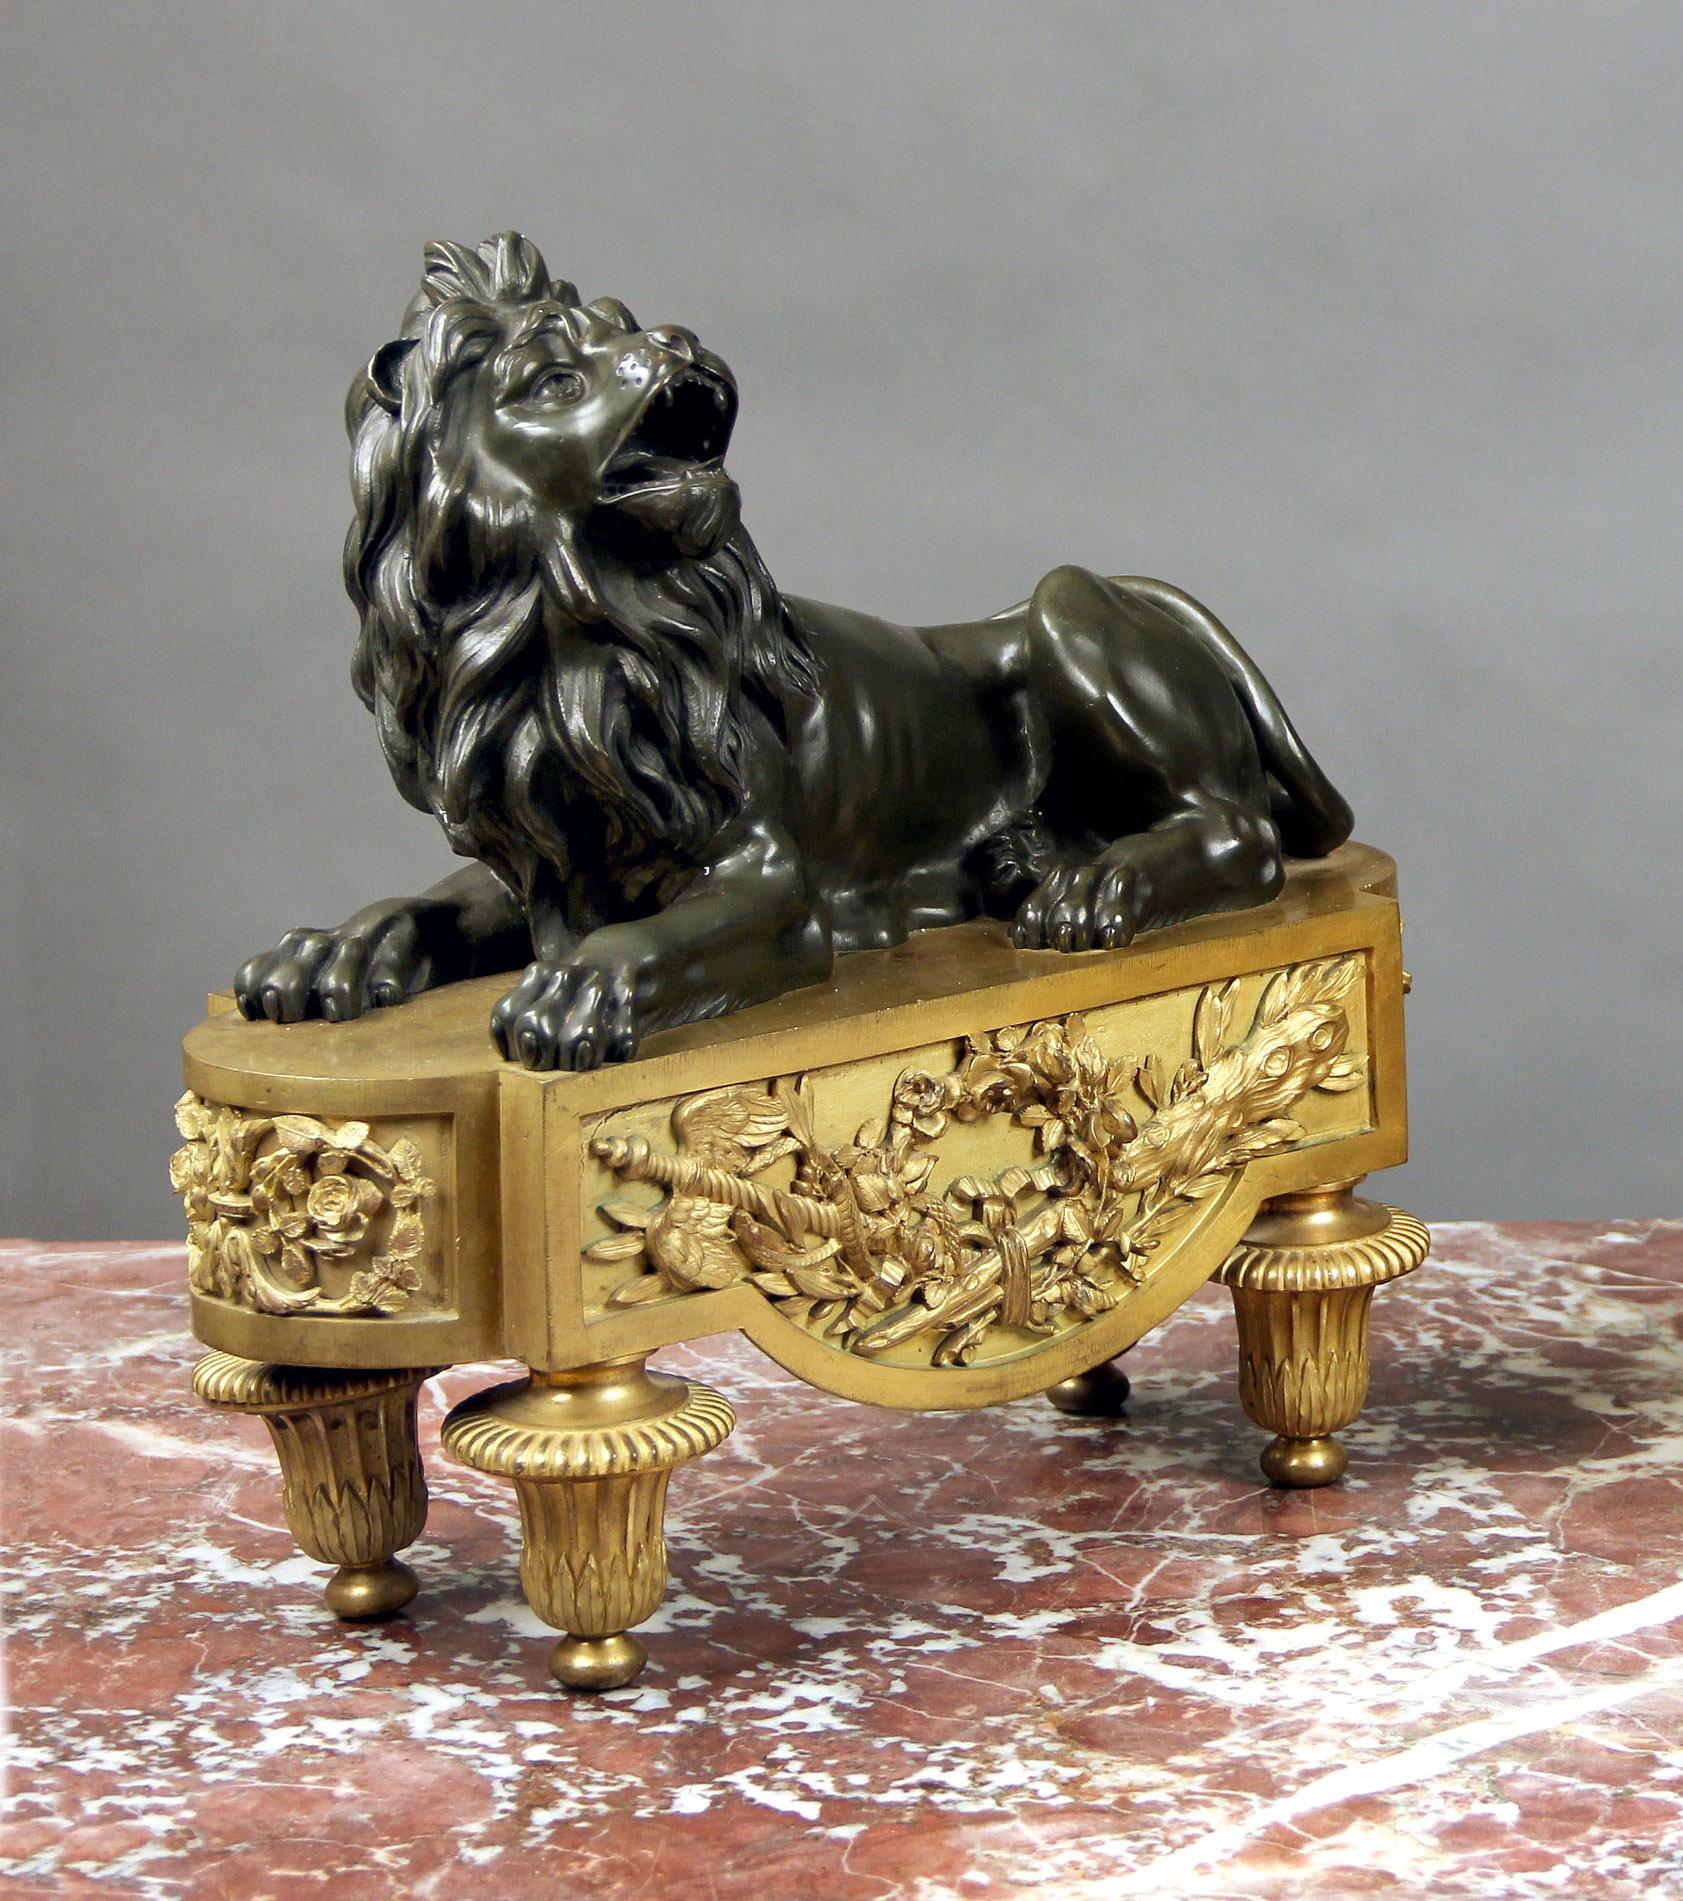 A Fine Pair of Late 19th Century Gilt and Patina Bronze Chenets

Each of a lion seated and roaring on a gilt base with a flower reef design.